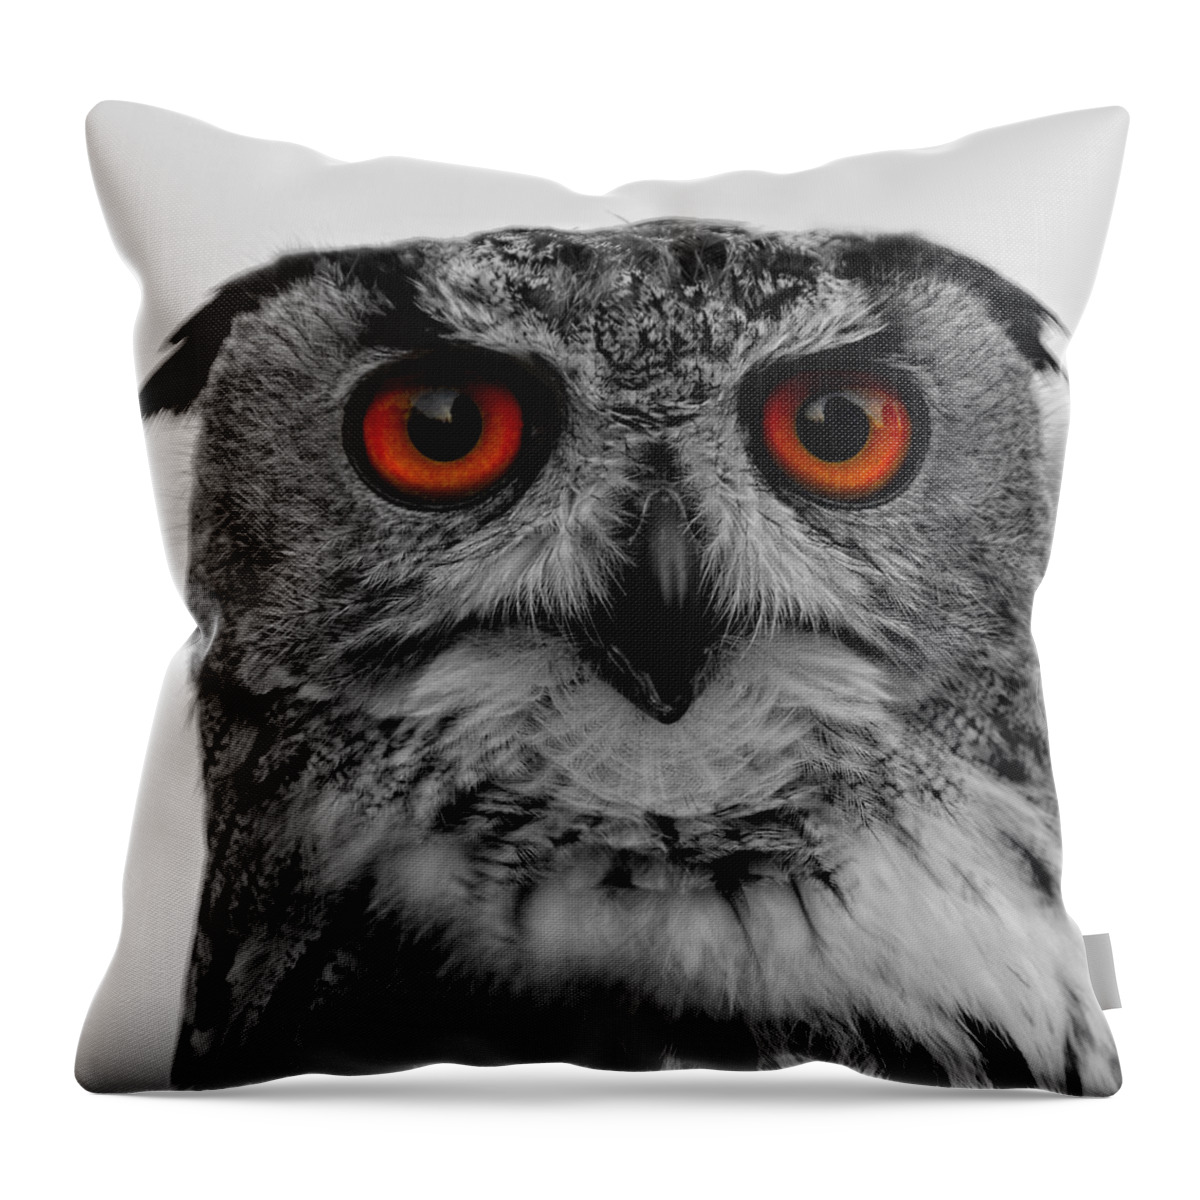 Adorable Throw Pillow featuring the photograph Owl by TouTouke A Y